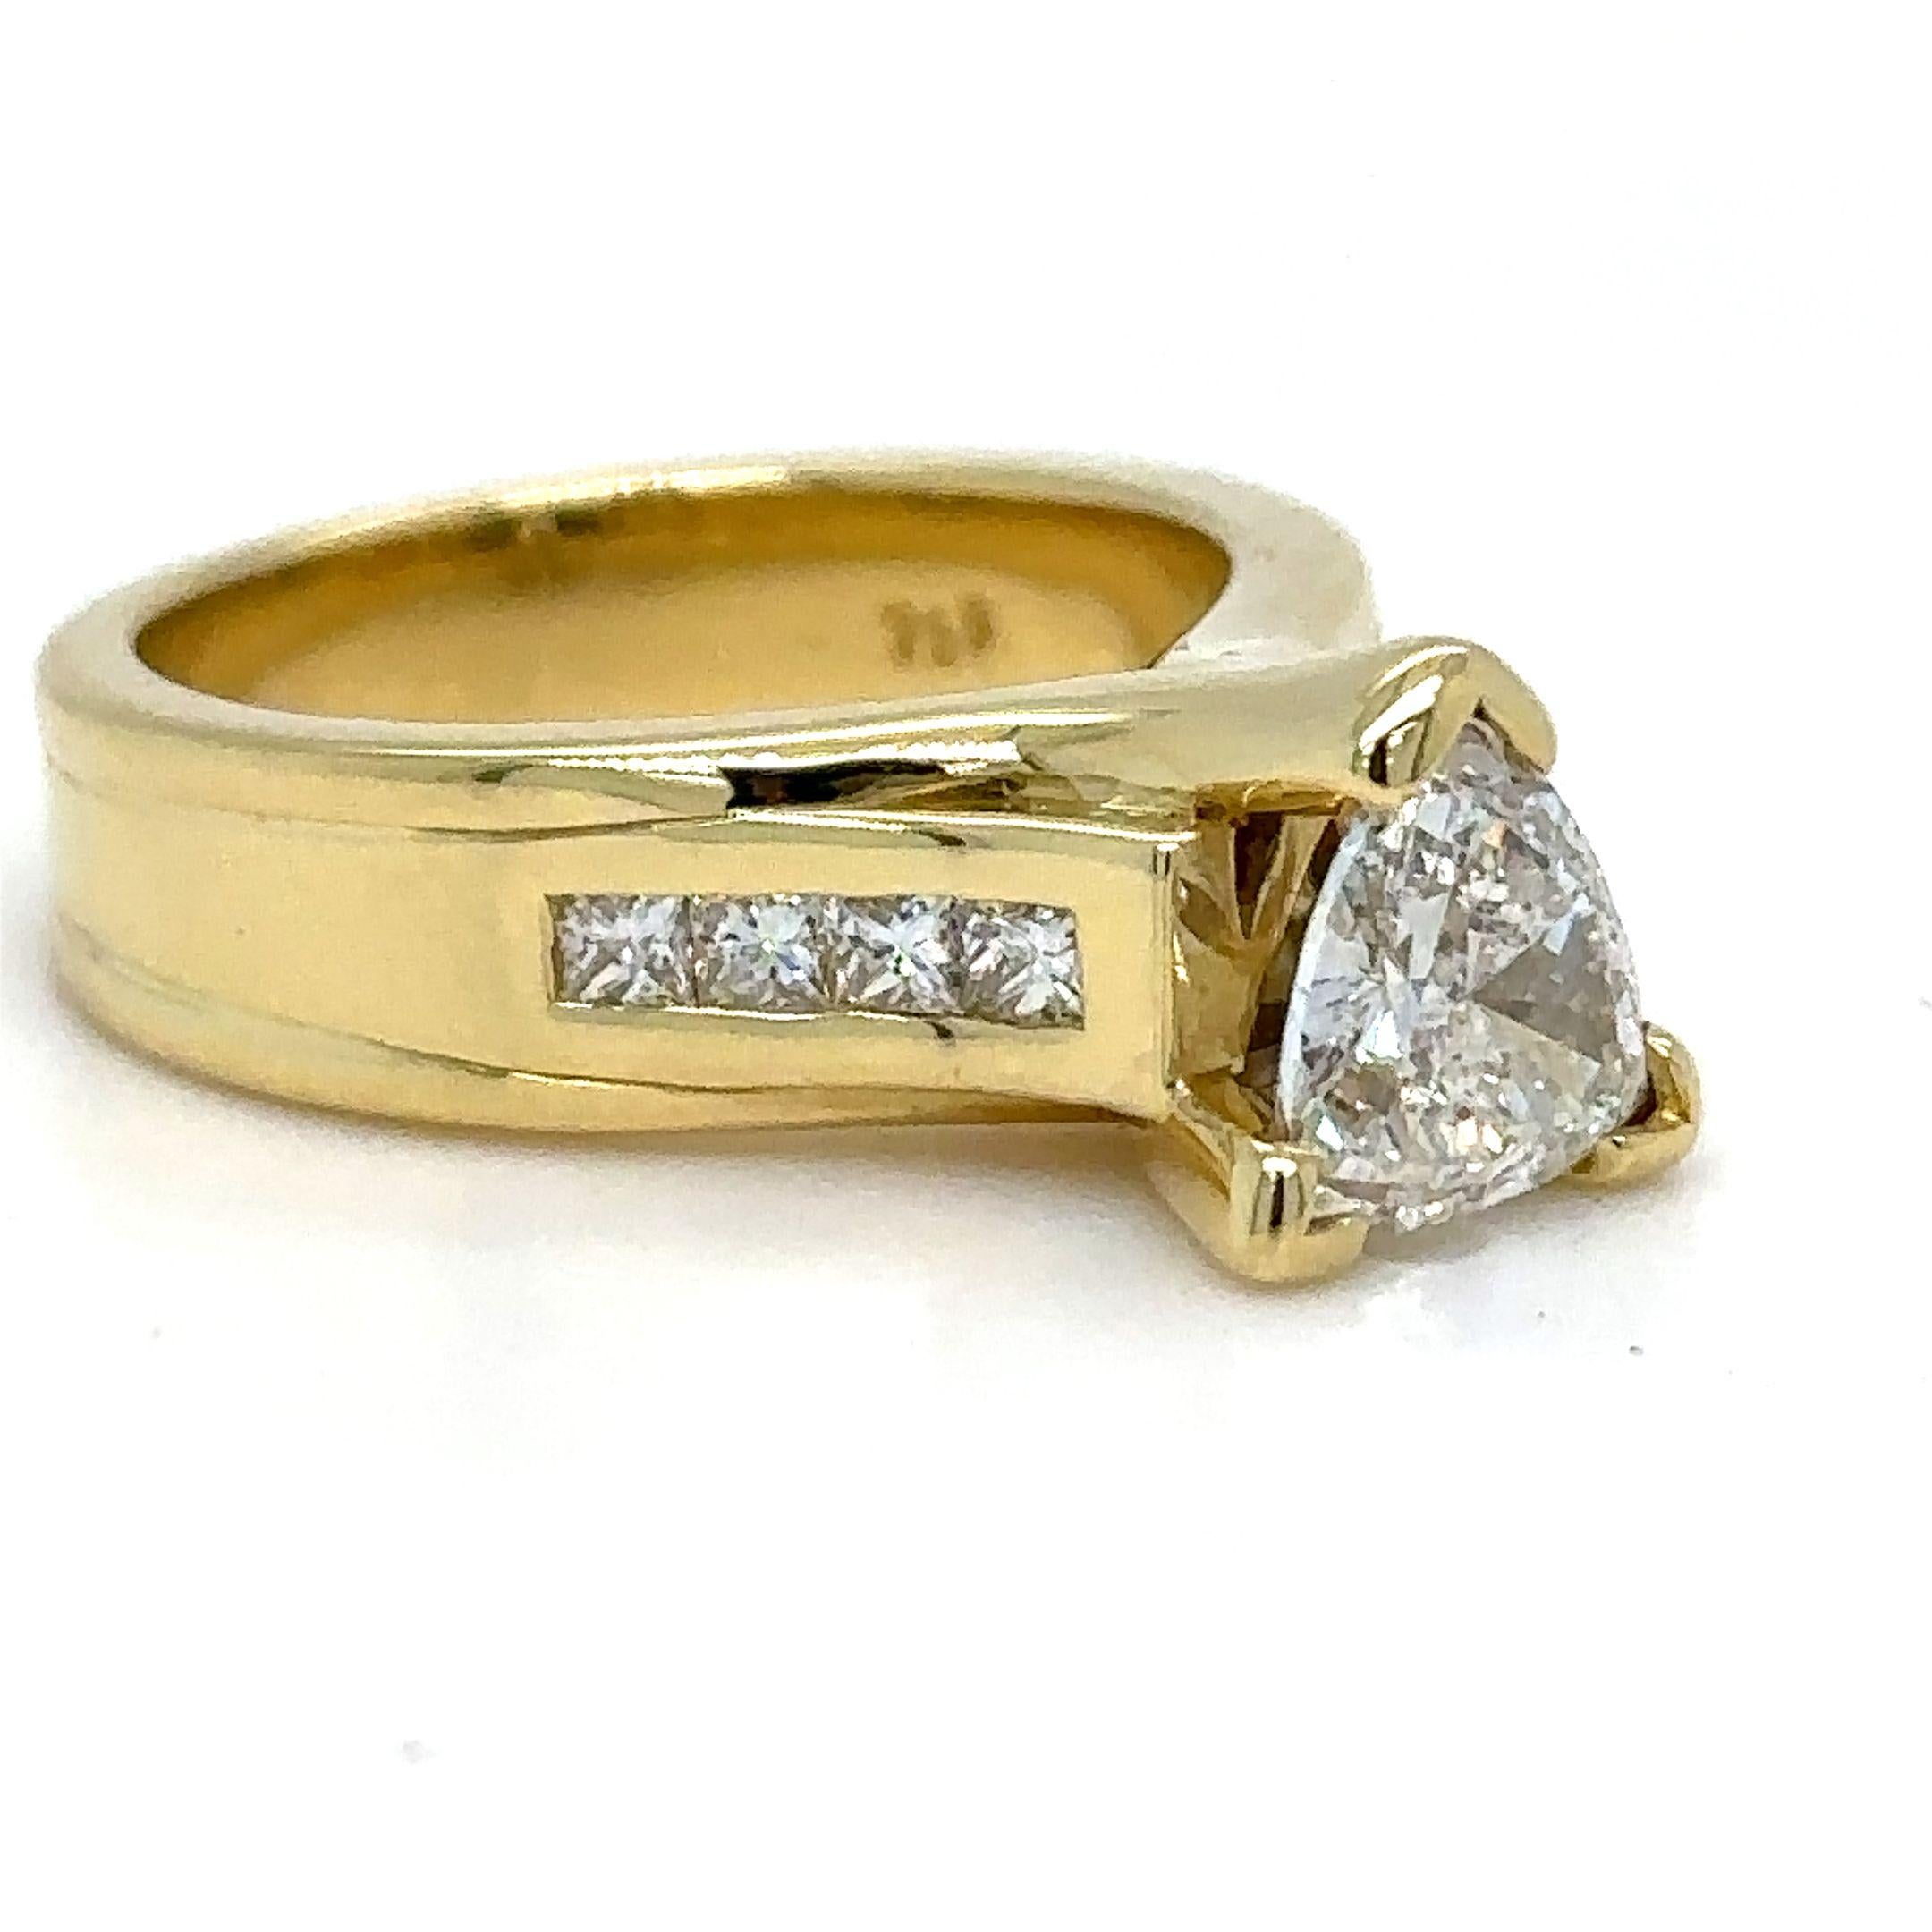 Brilliant Cut GIA Diamond Engagement Ring 1.35ct For Sale